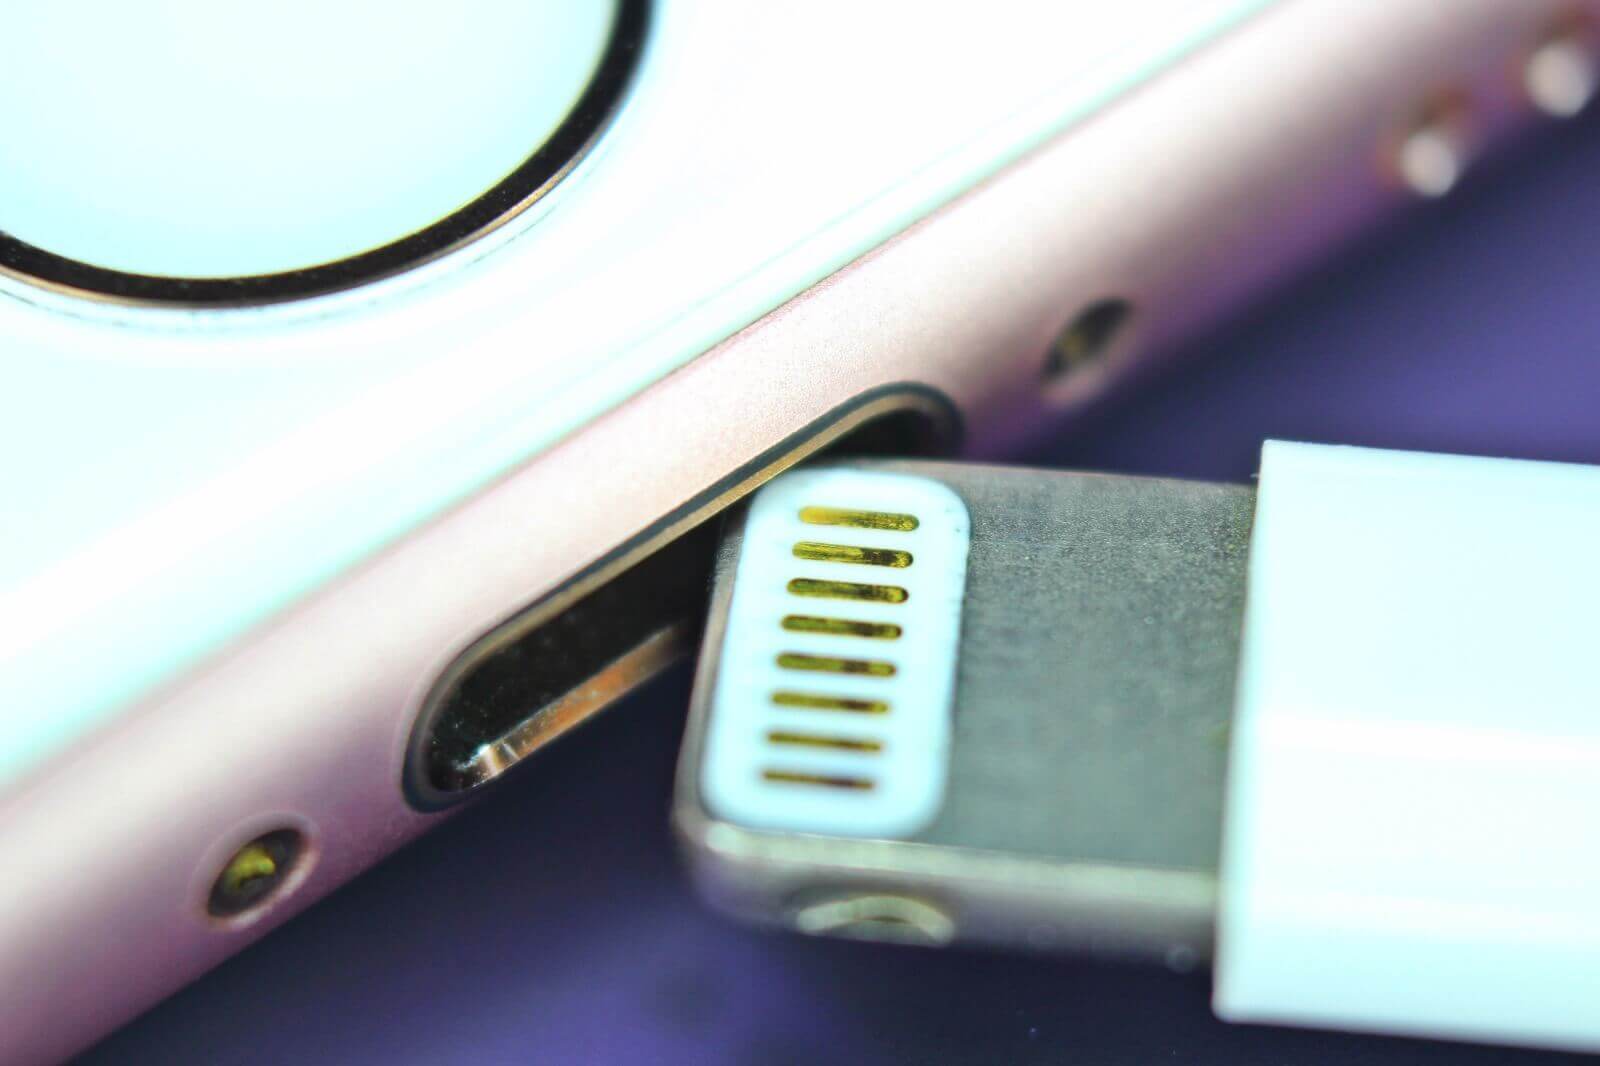 iPhone's Lightning Cable